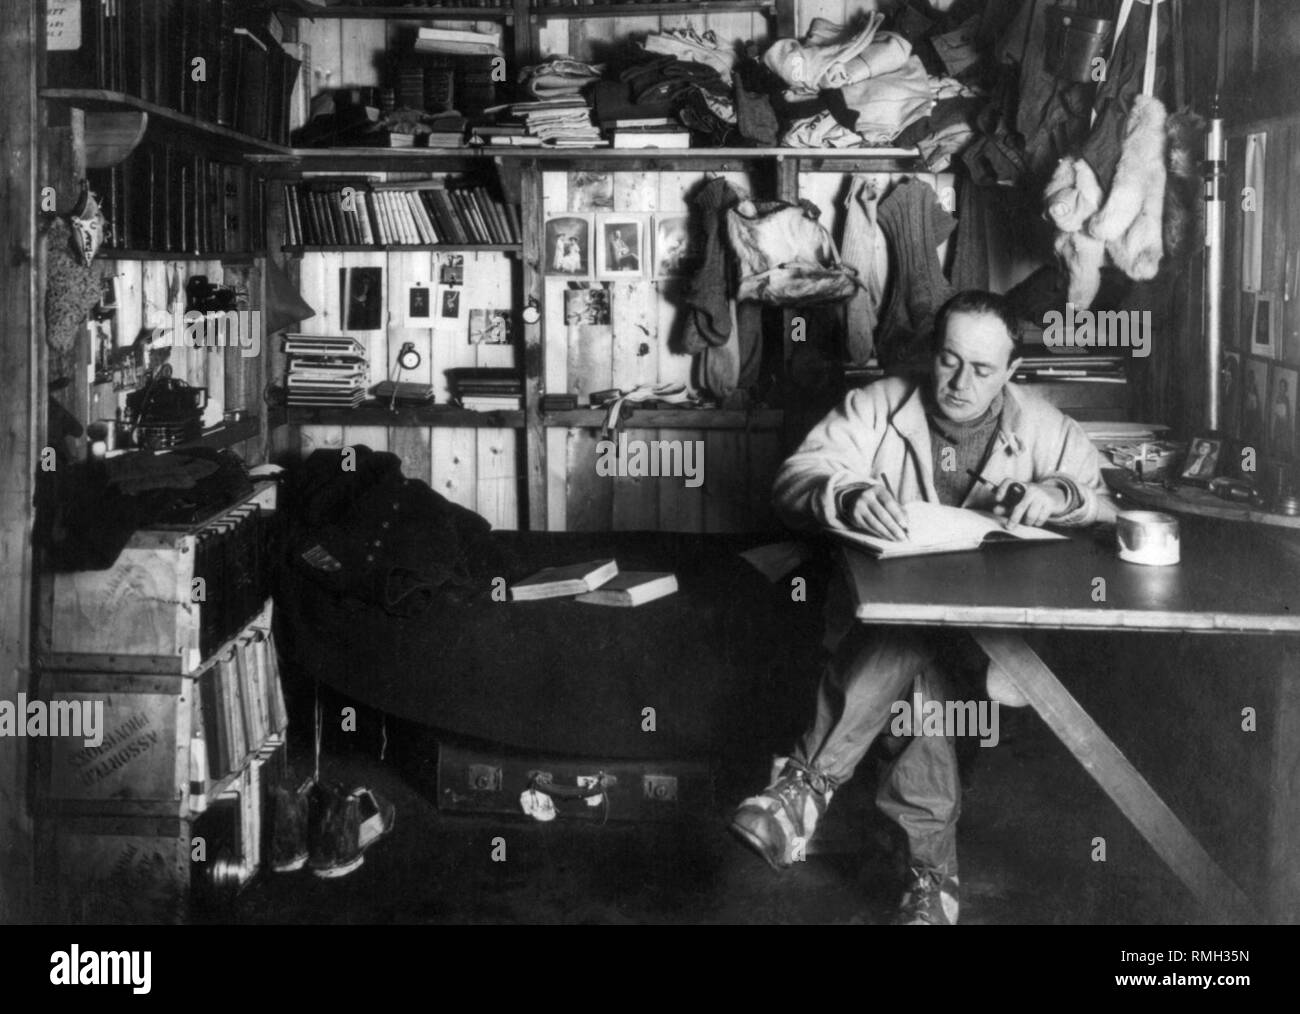 Captain robert D scott writing in his diary in his quarters leader of the Terra Nova expedition during the British Antarctic Expedition to Antarctica  Photo taken 1910 Stock Photo